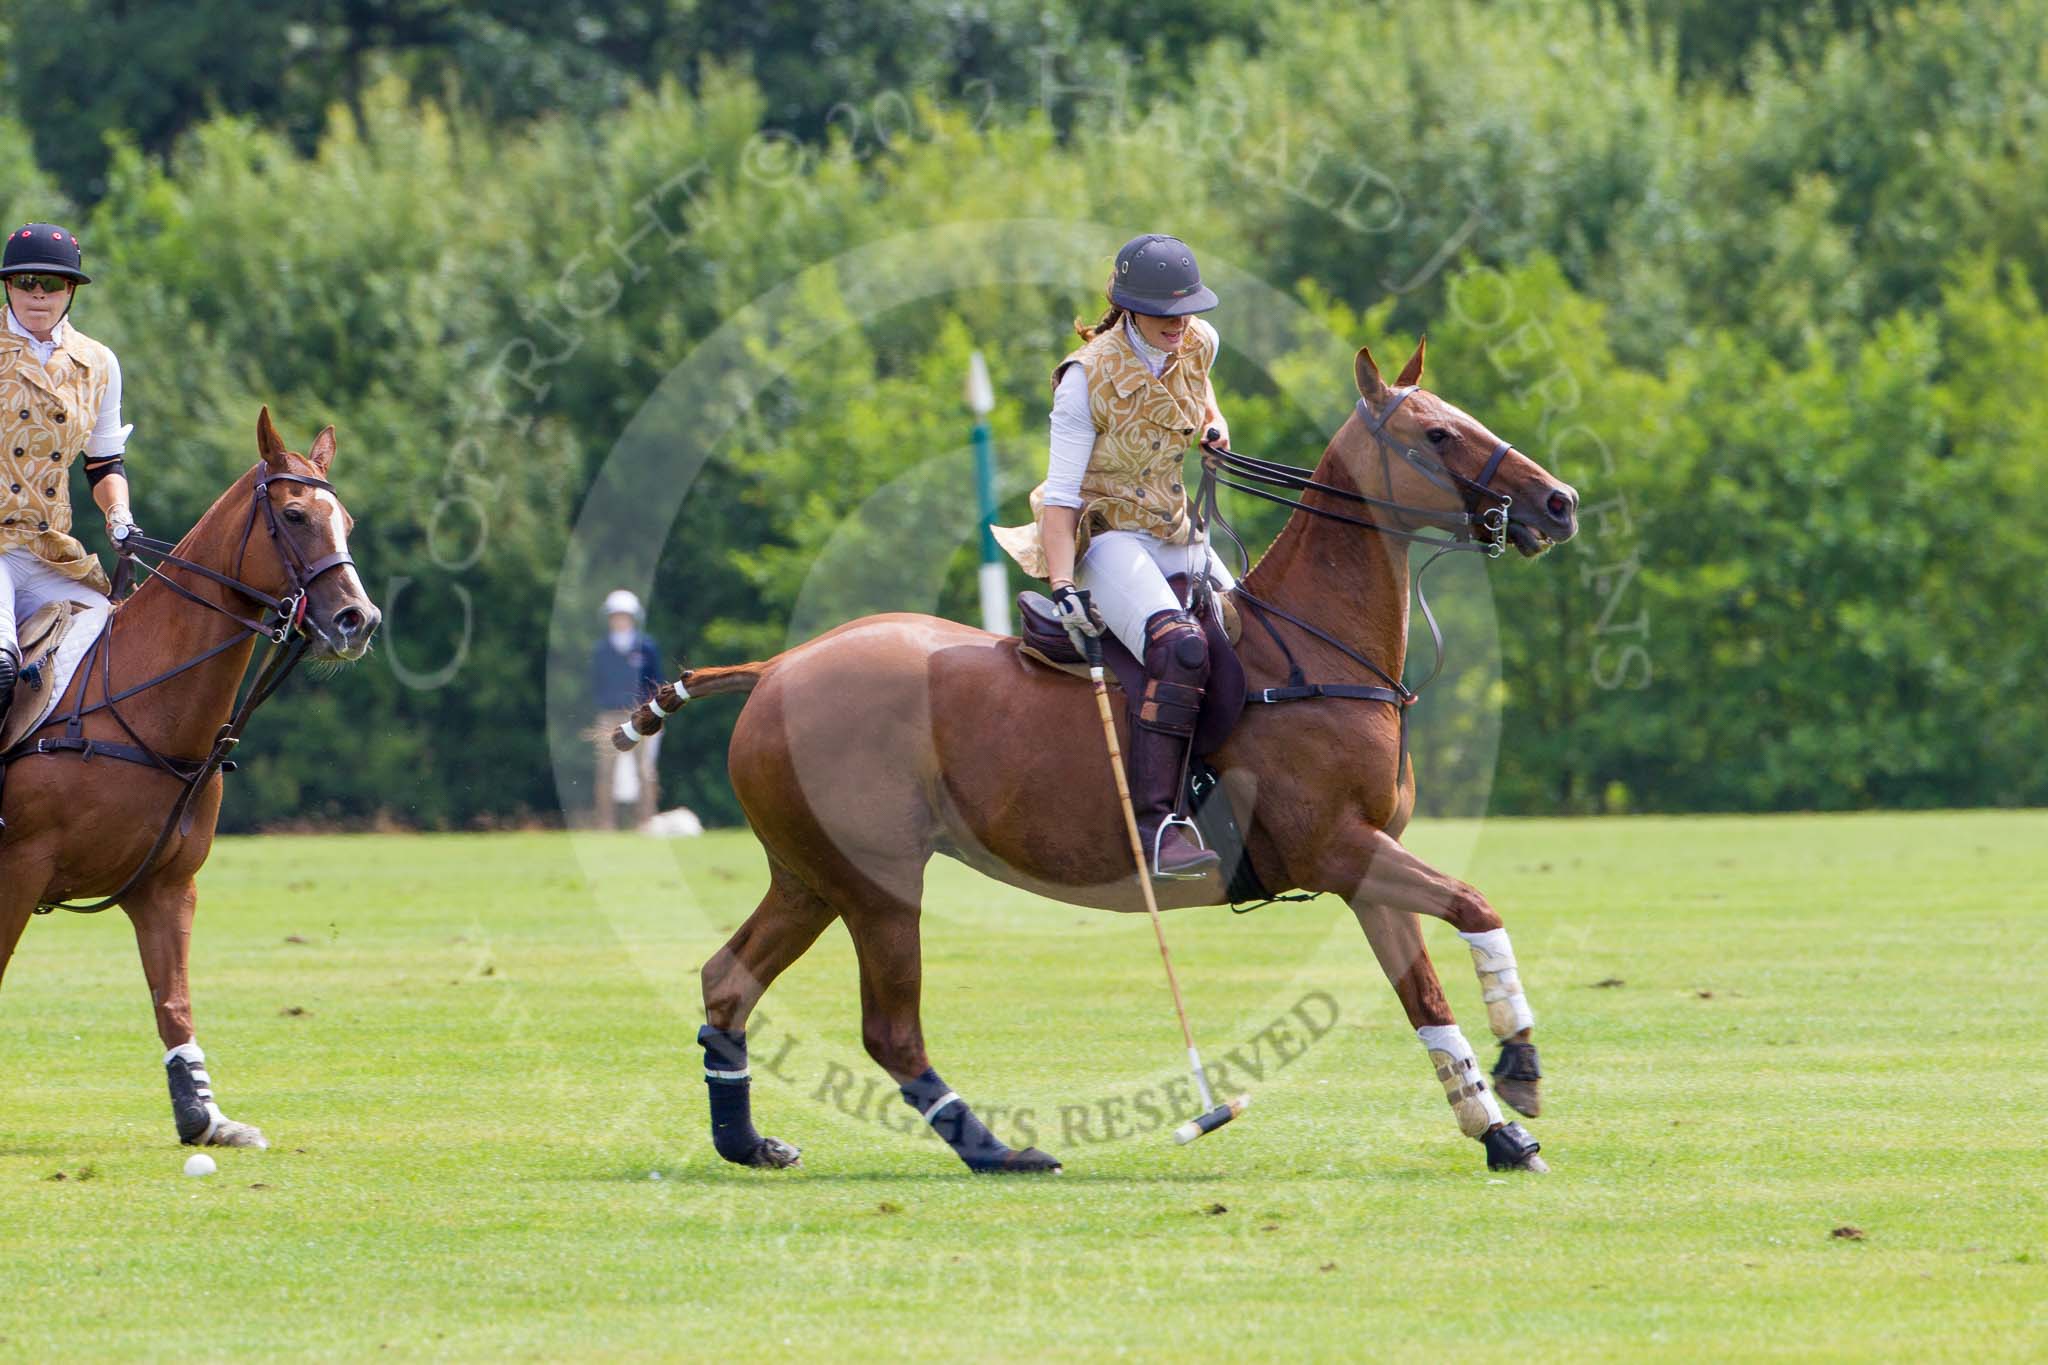 7th Heritage Polo Cup semi-finals: Sheena Robertson joined the Amazons of Polo Team sponsored by Polistas..
Hurtwood Park Polo Club,
Ewhurst Green,
Surrey,
United Kingdom,
on 04 August 2012 at 13:35, image #156